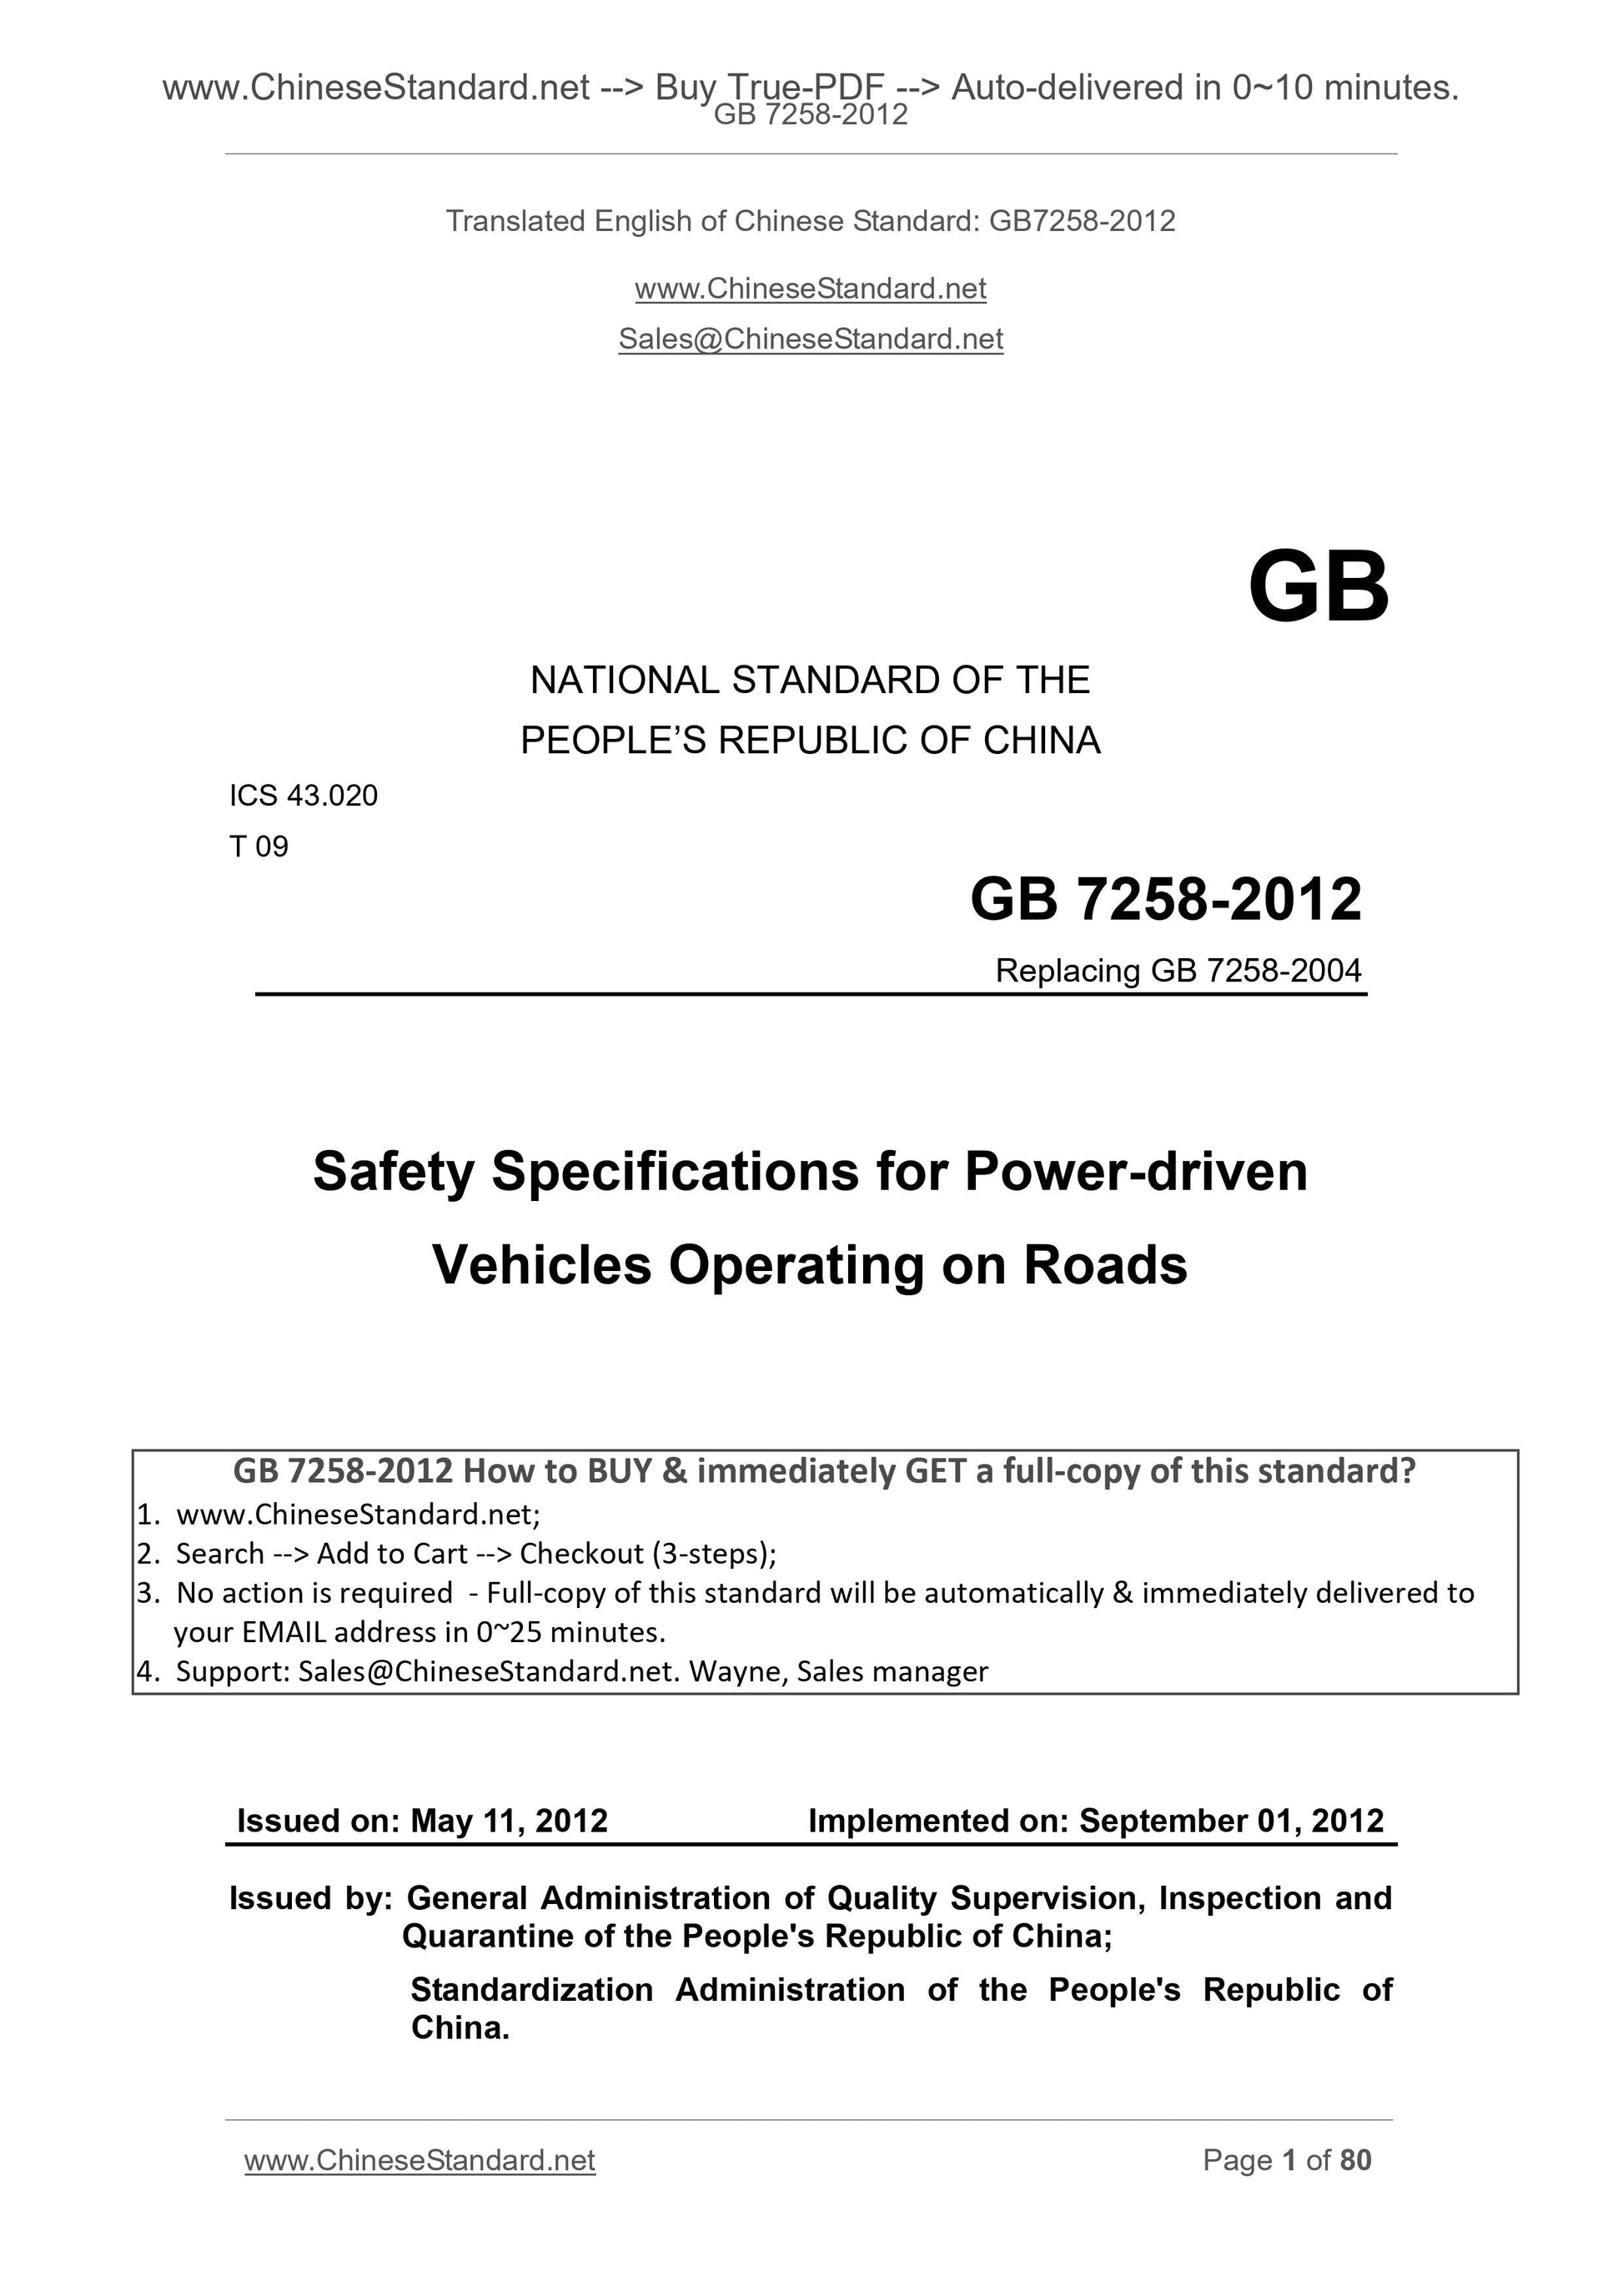 GB 7258-2012 Page 1